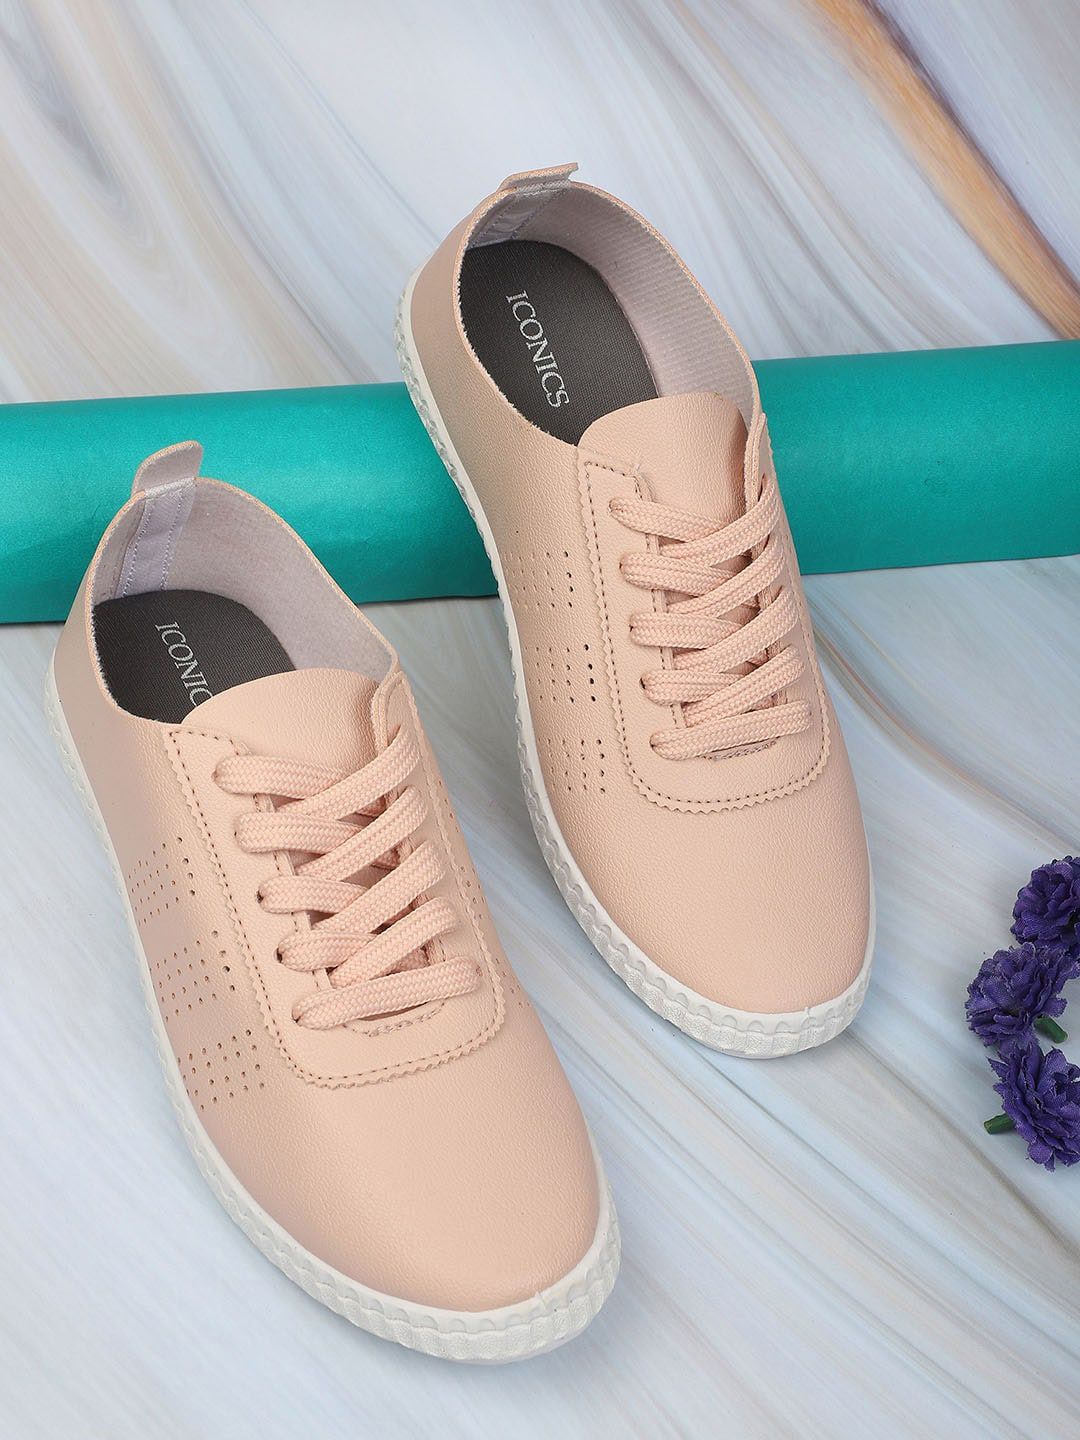 ICONICS Women Peach-Coloured Sneakers Price in India